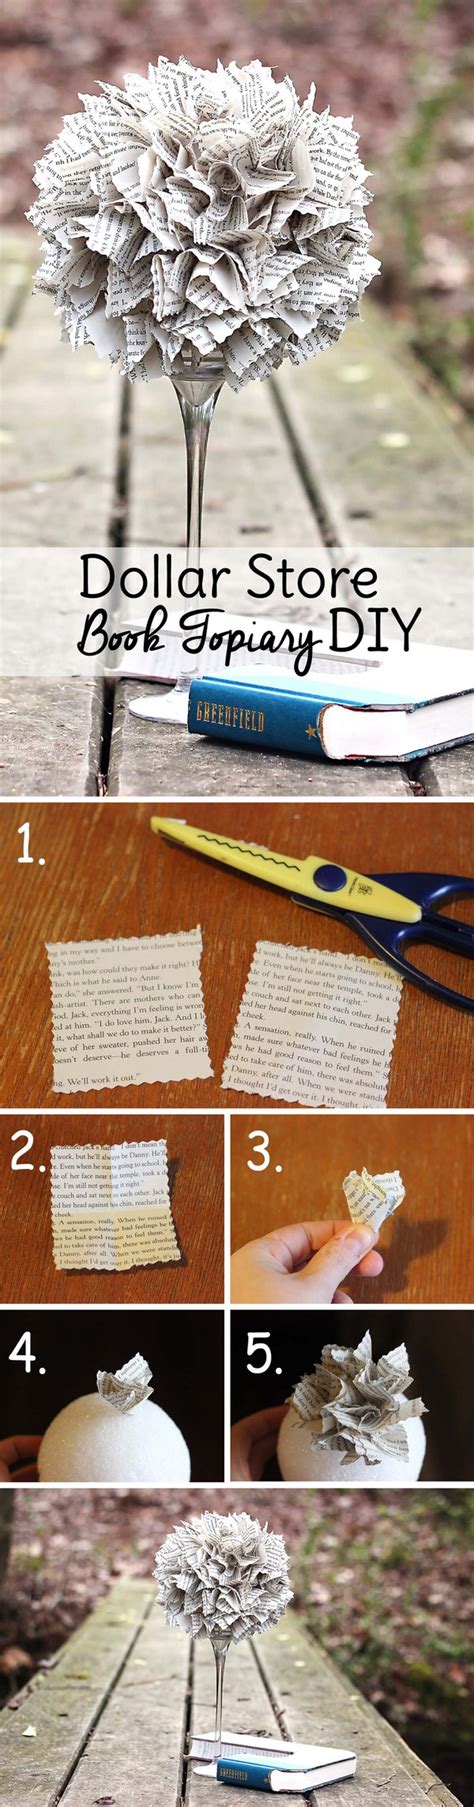 22 Outstanding DIY Craft Ideas to Make With Old Books - The ART in LIFE